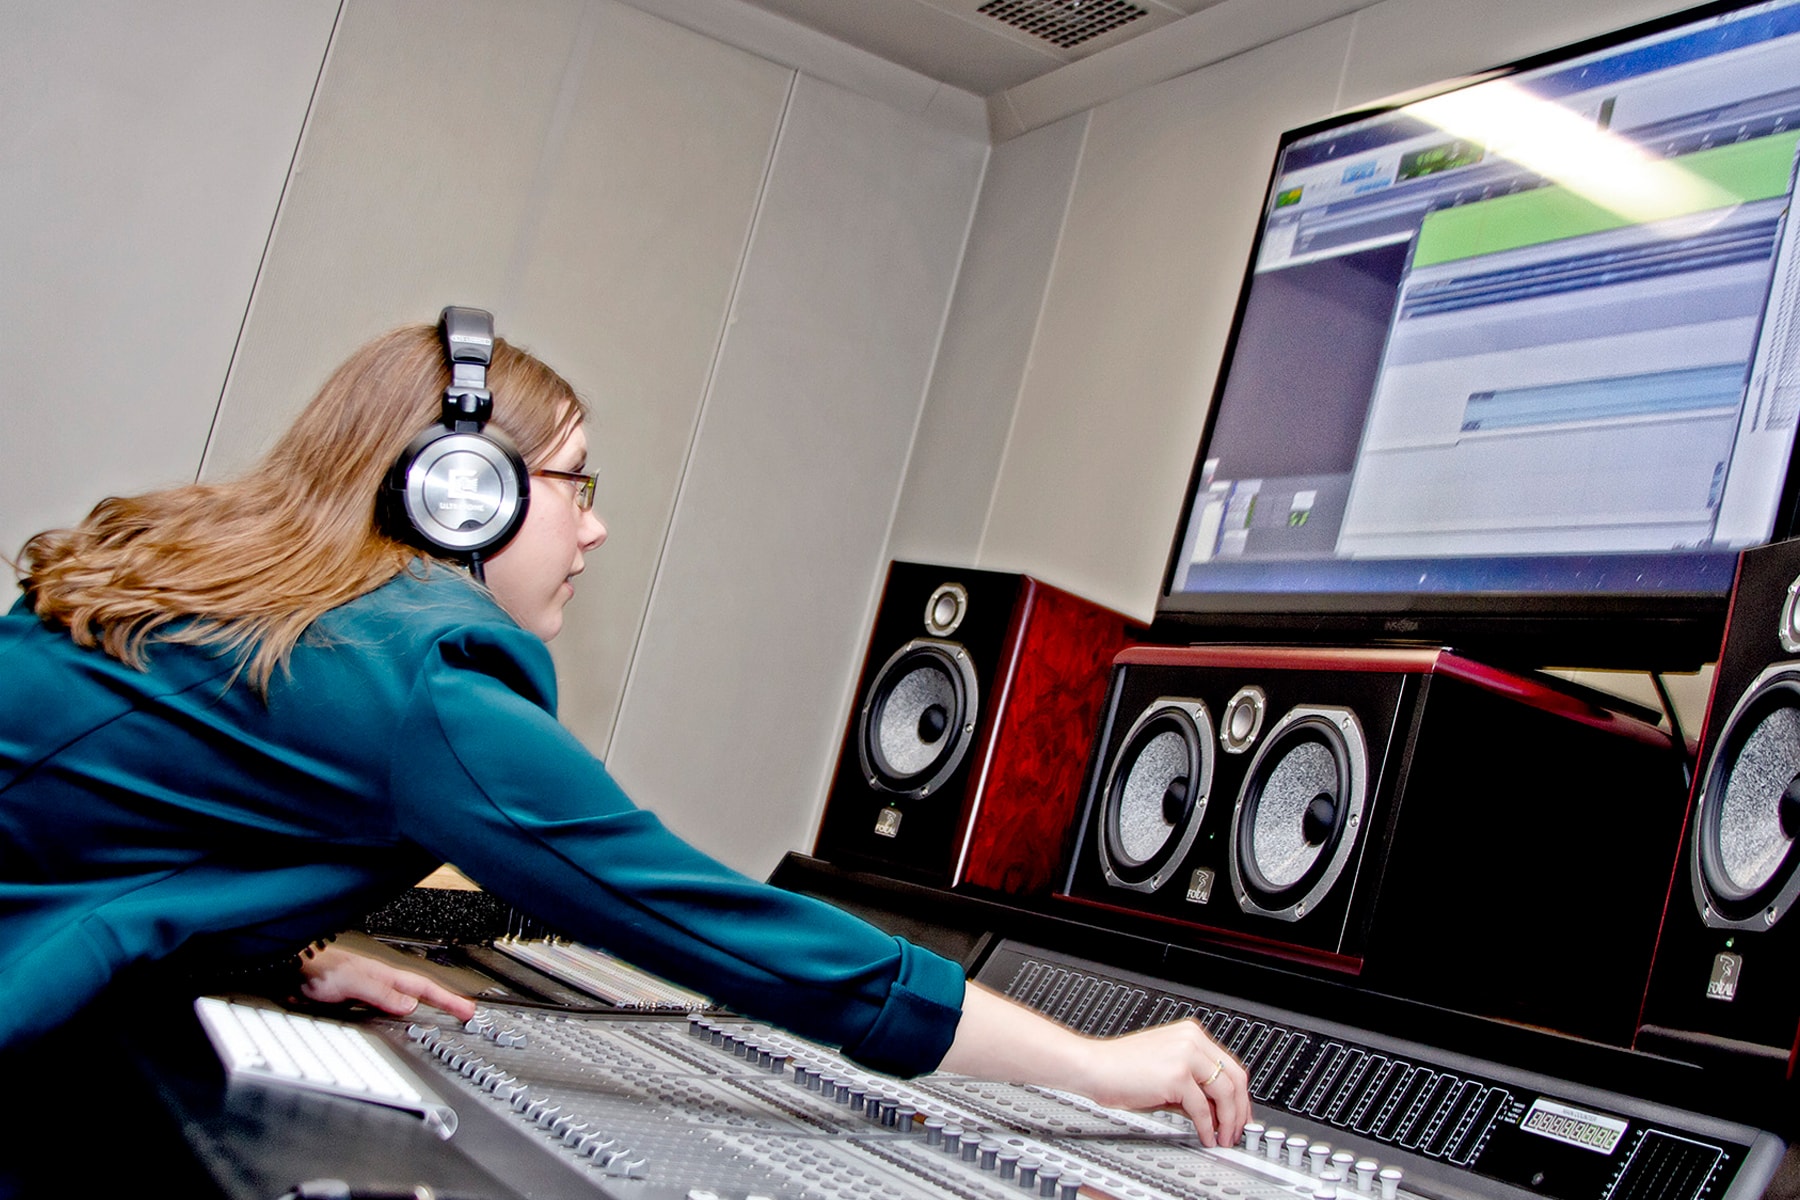 Kori Loomis working at a sound board in front of a large monitor